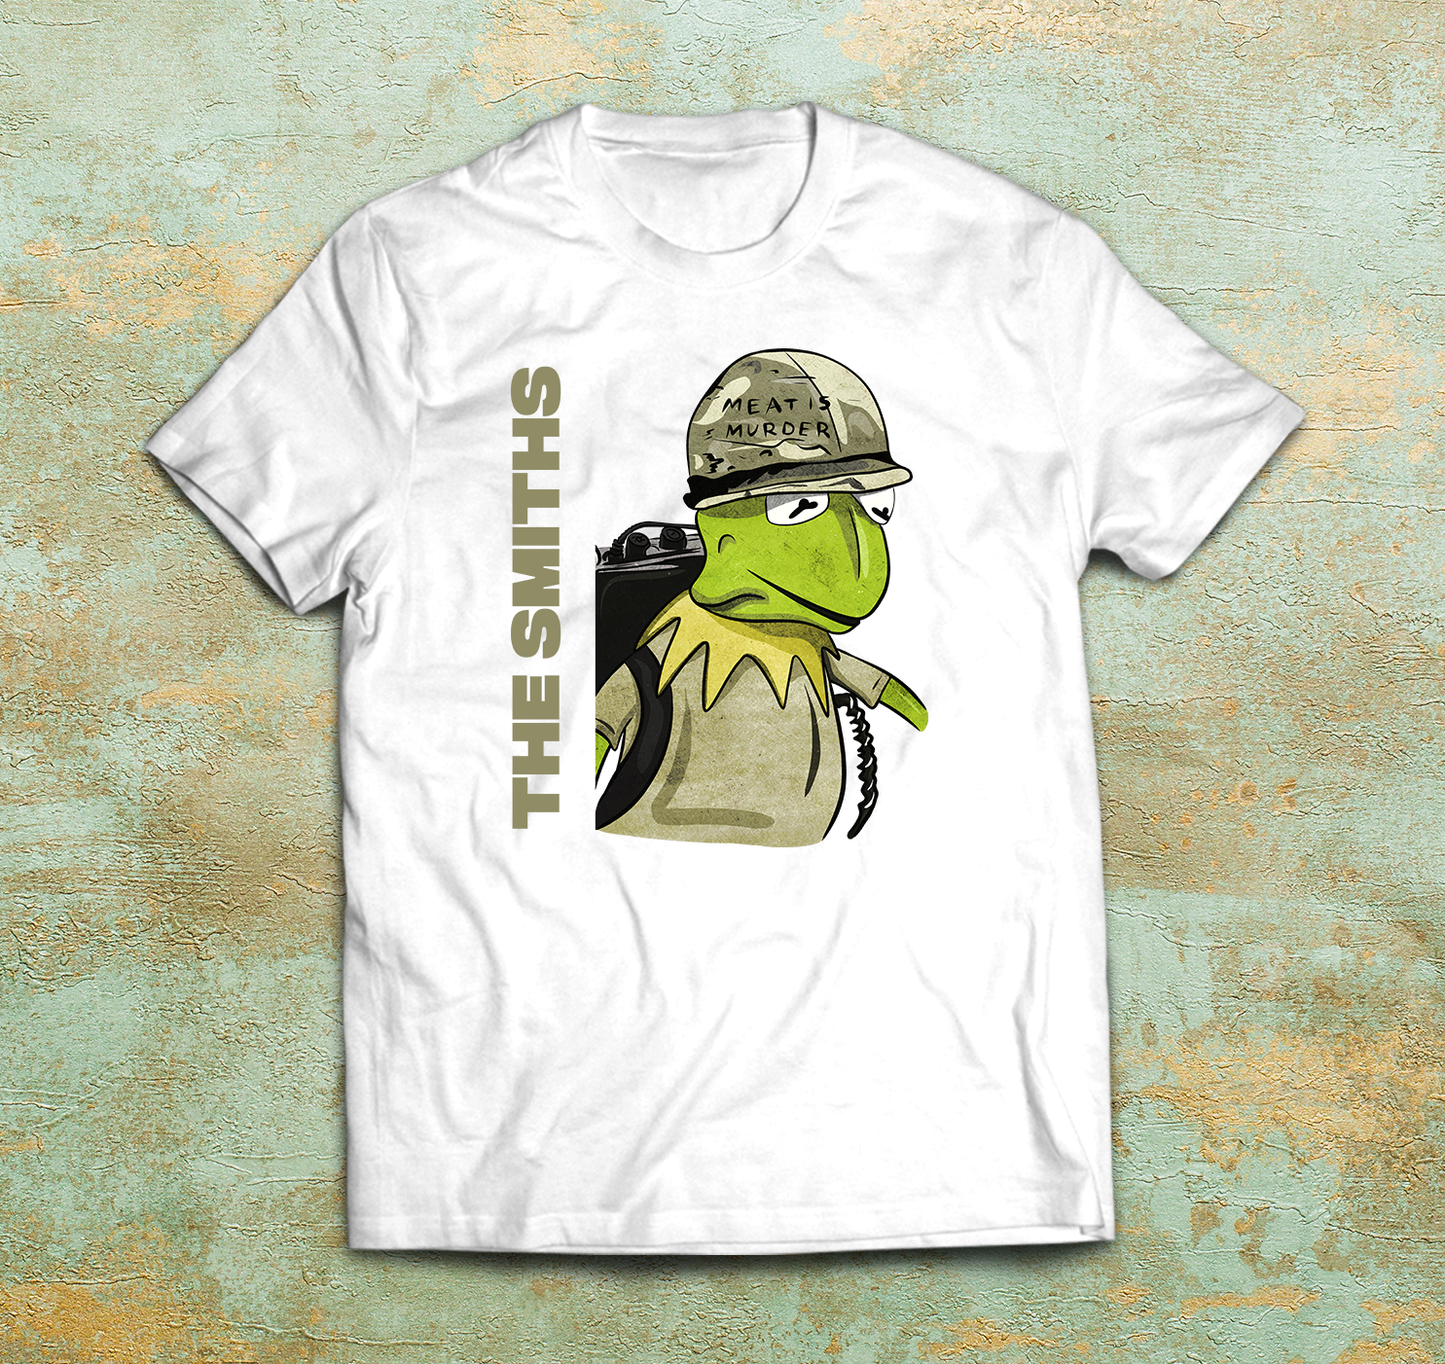 The Smiths - Meat is Murder Muppets Parody Shirt